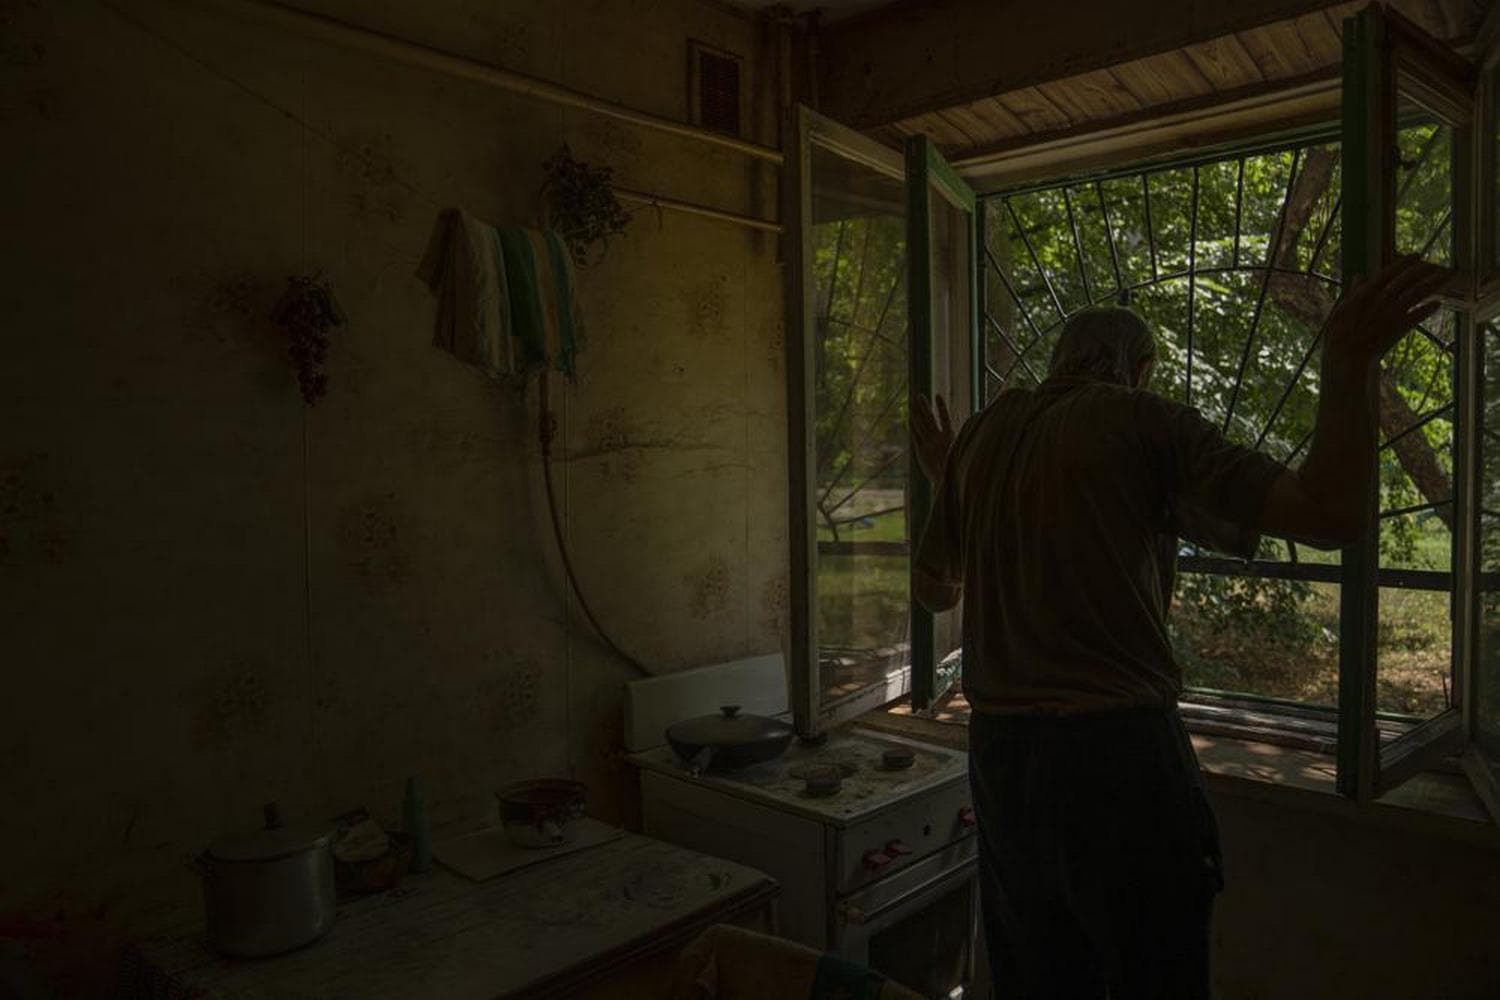 Seventy-year-old pensioner Valerii Ilchenko, who lives alone and is refusing to evacuate, opens the windows of the kitchen in his apartment, in Kramatorsk